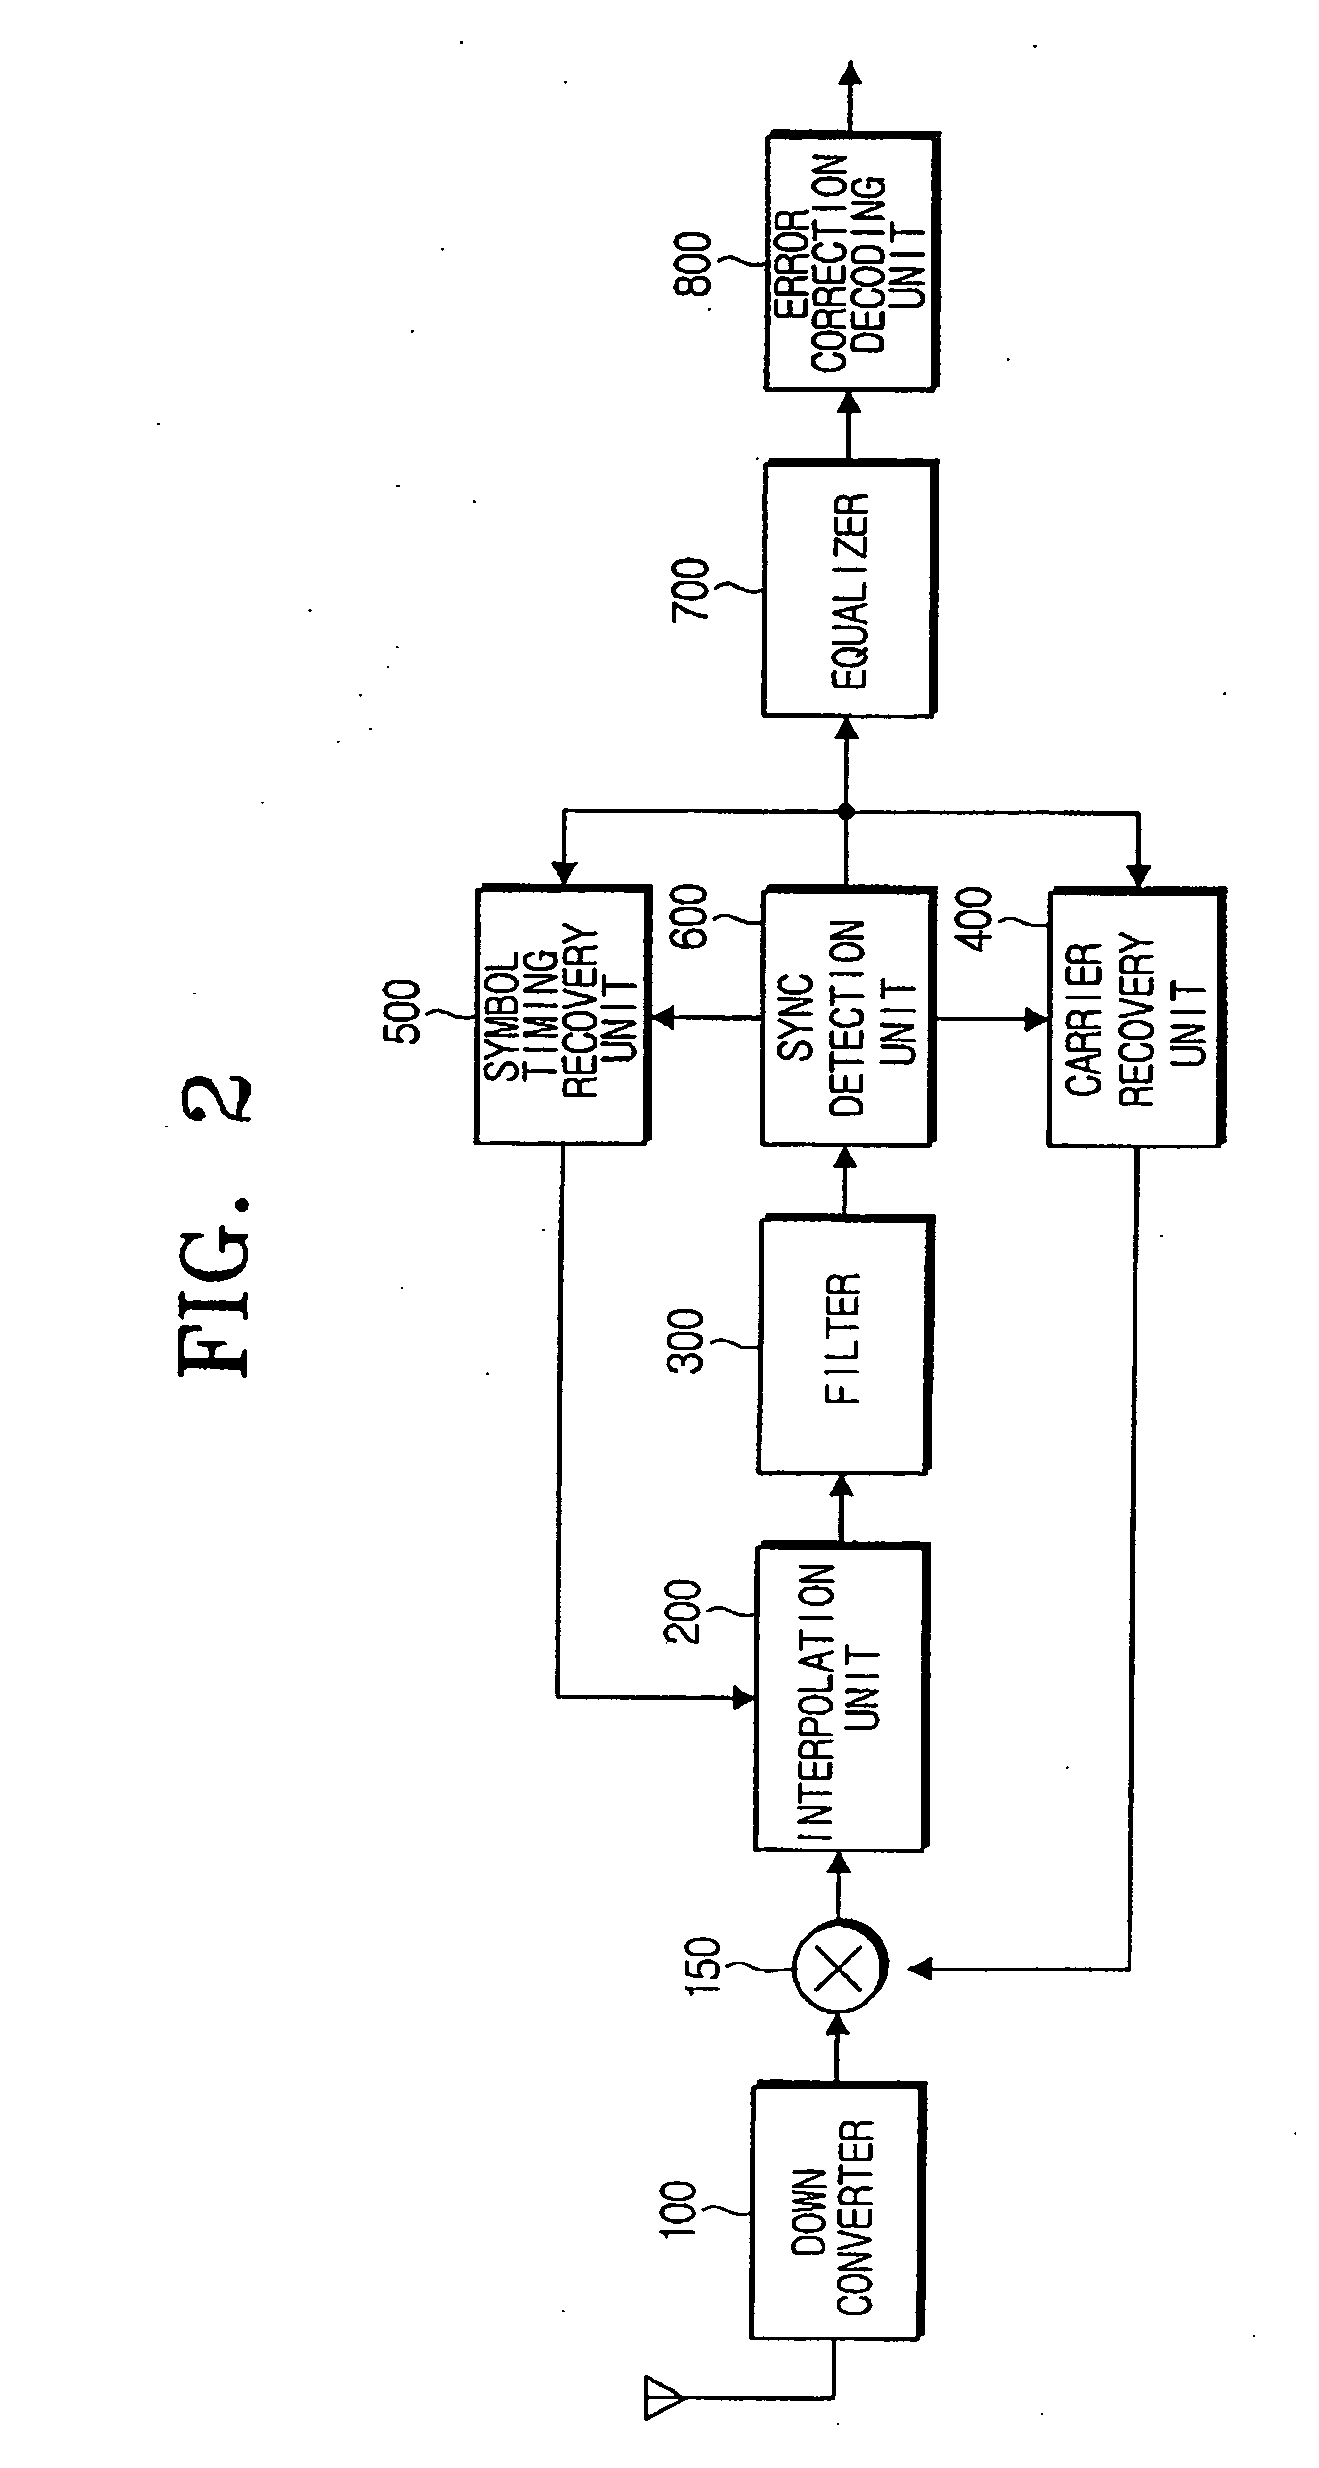 Apparatus to detect a sync signal, a VSB receiver using the same, and a method thereof